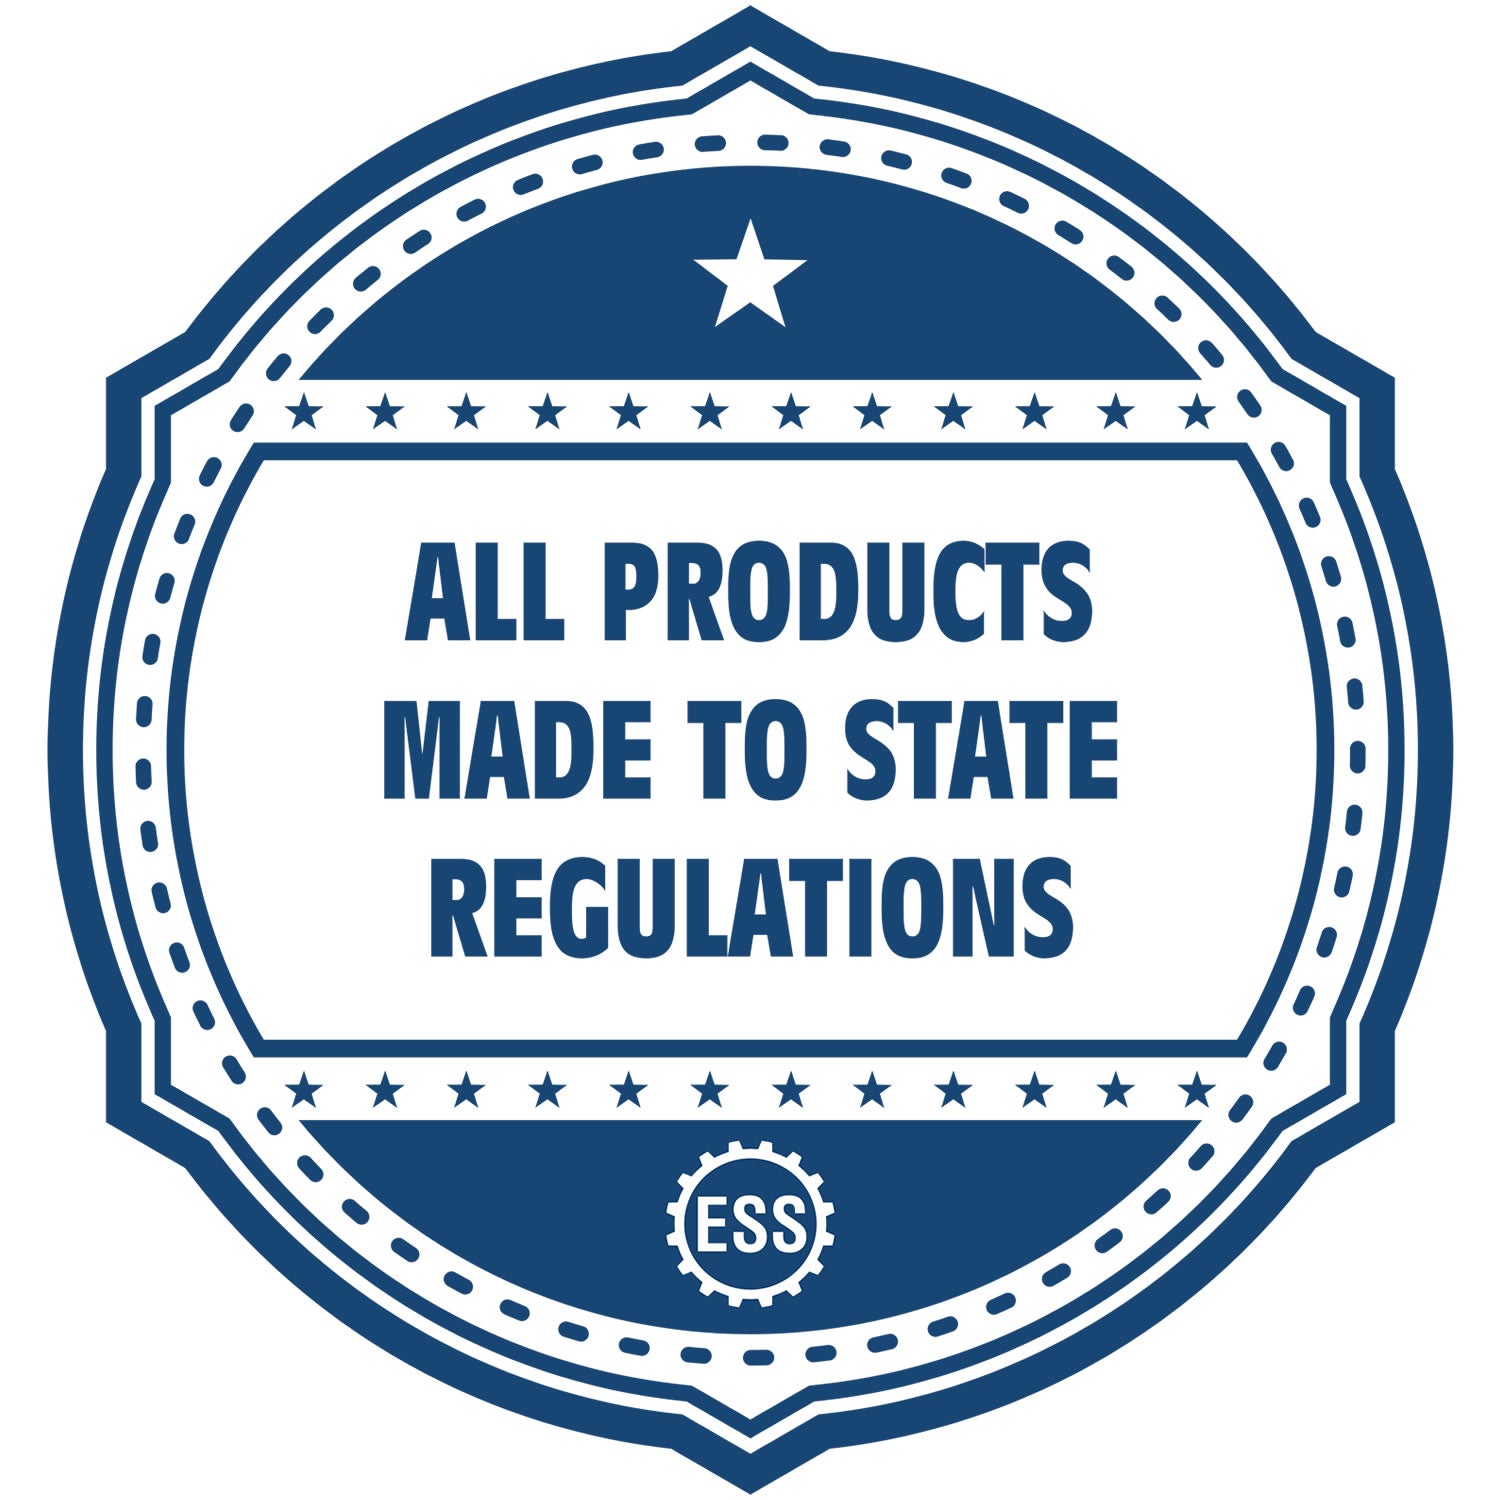 An icon or badge element for the Self-Inking Nevada PE Stamp showing that this product is made in compliance with state regulations.